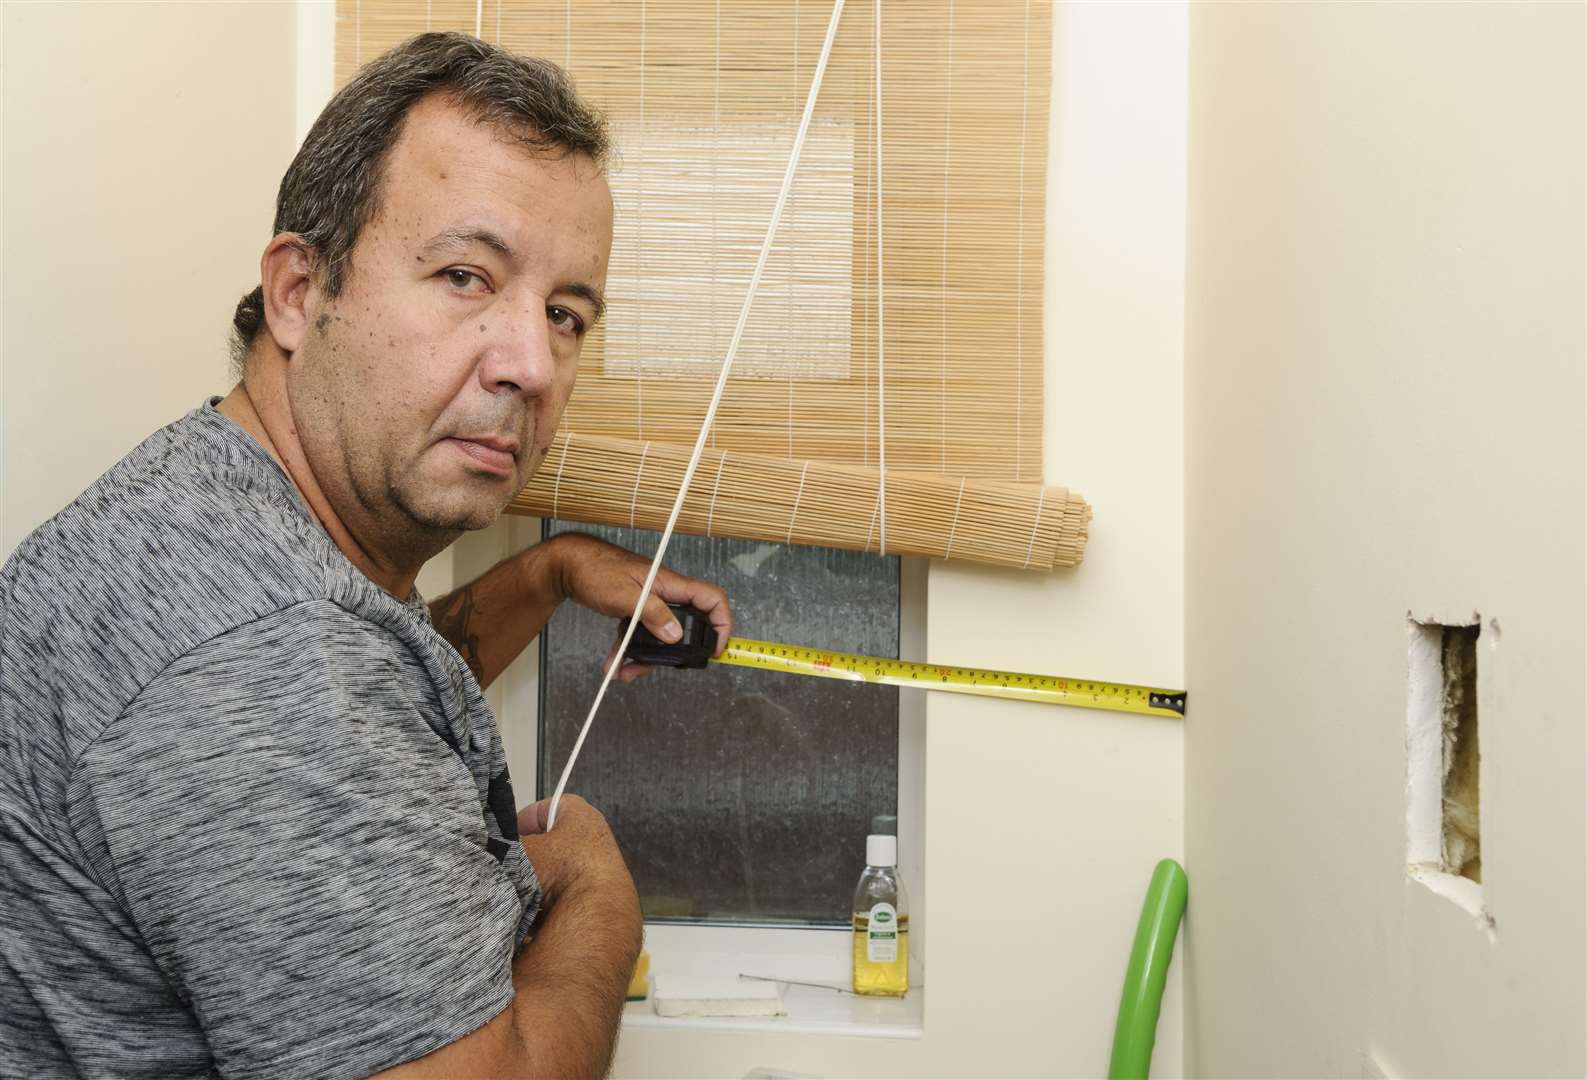 Civil engineer Jose Bolou carried out a thorough investigation of his property to see if it met building standards